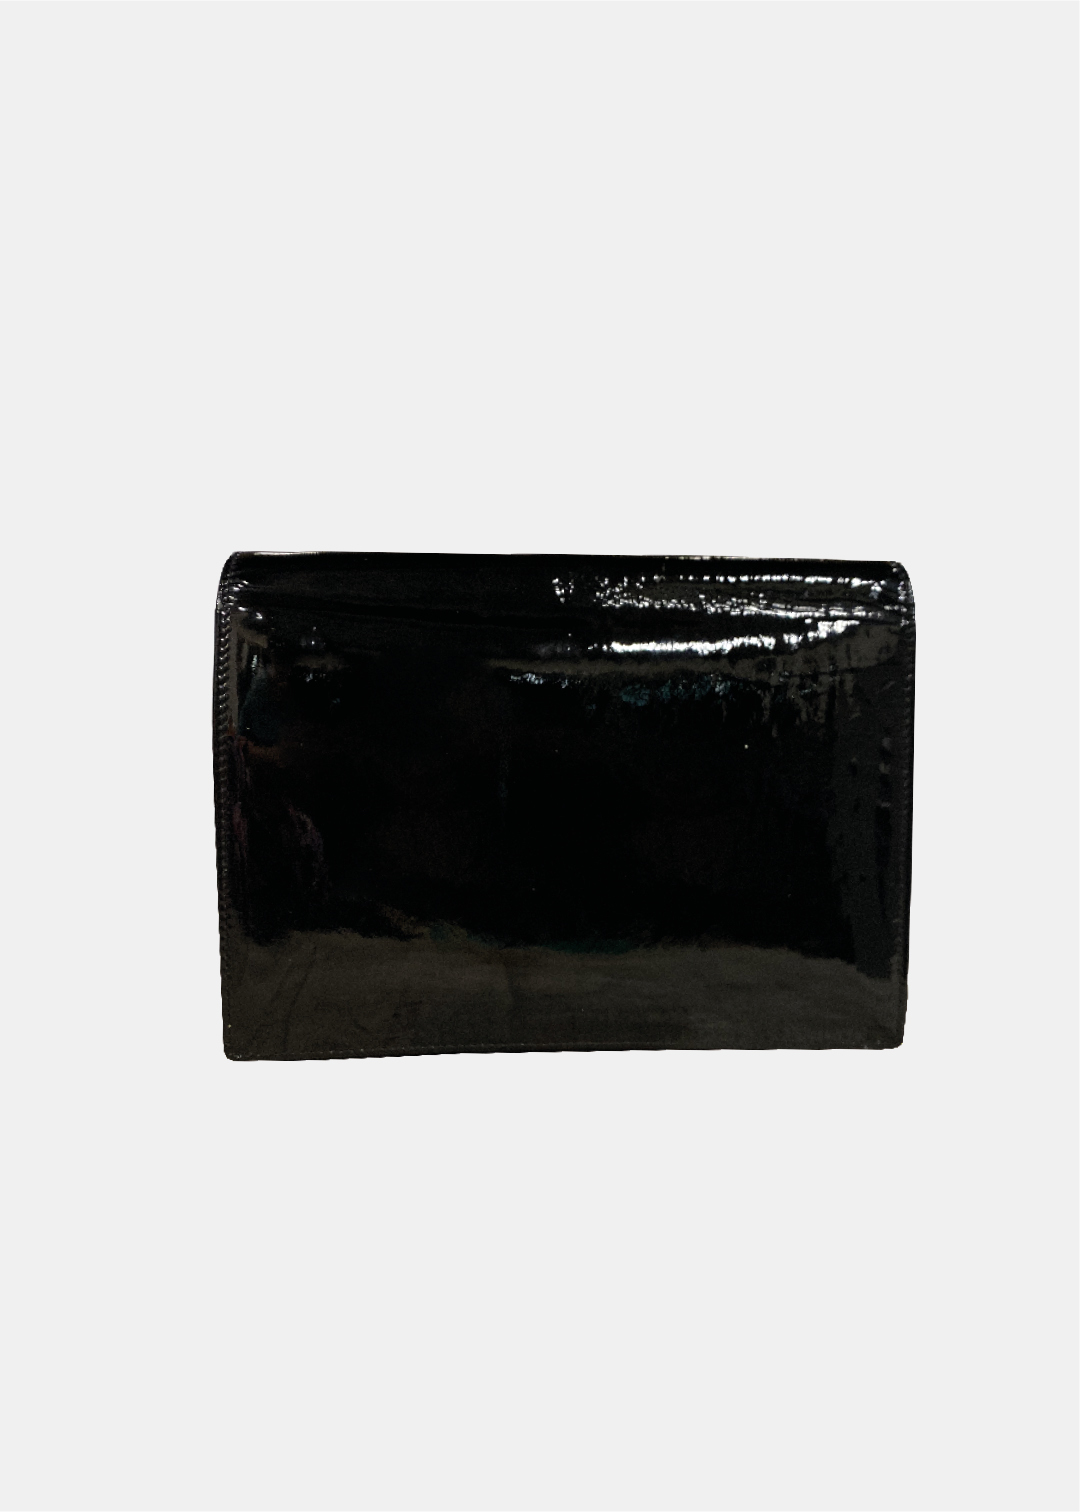 Chanel Clutch with Chain AP3125 B09845 94305, Black, One Size